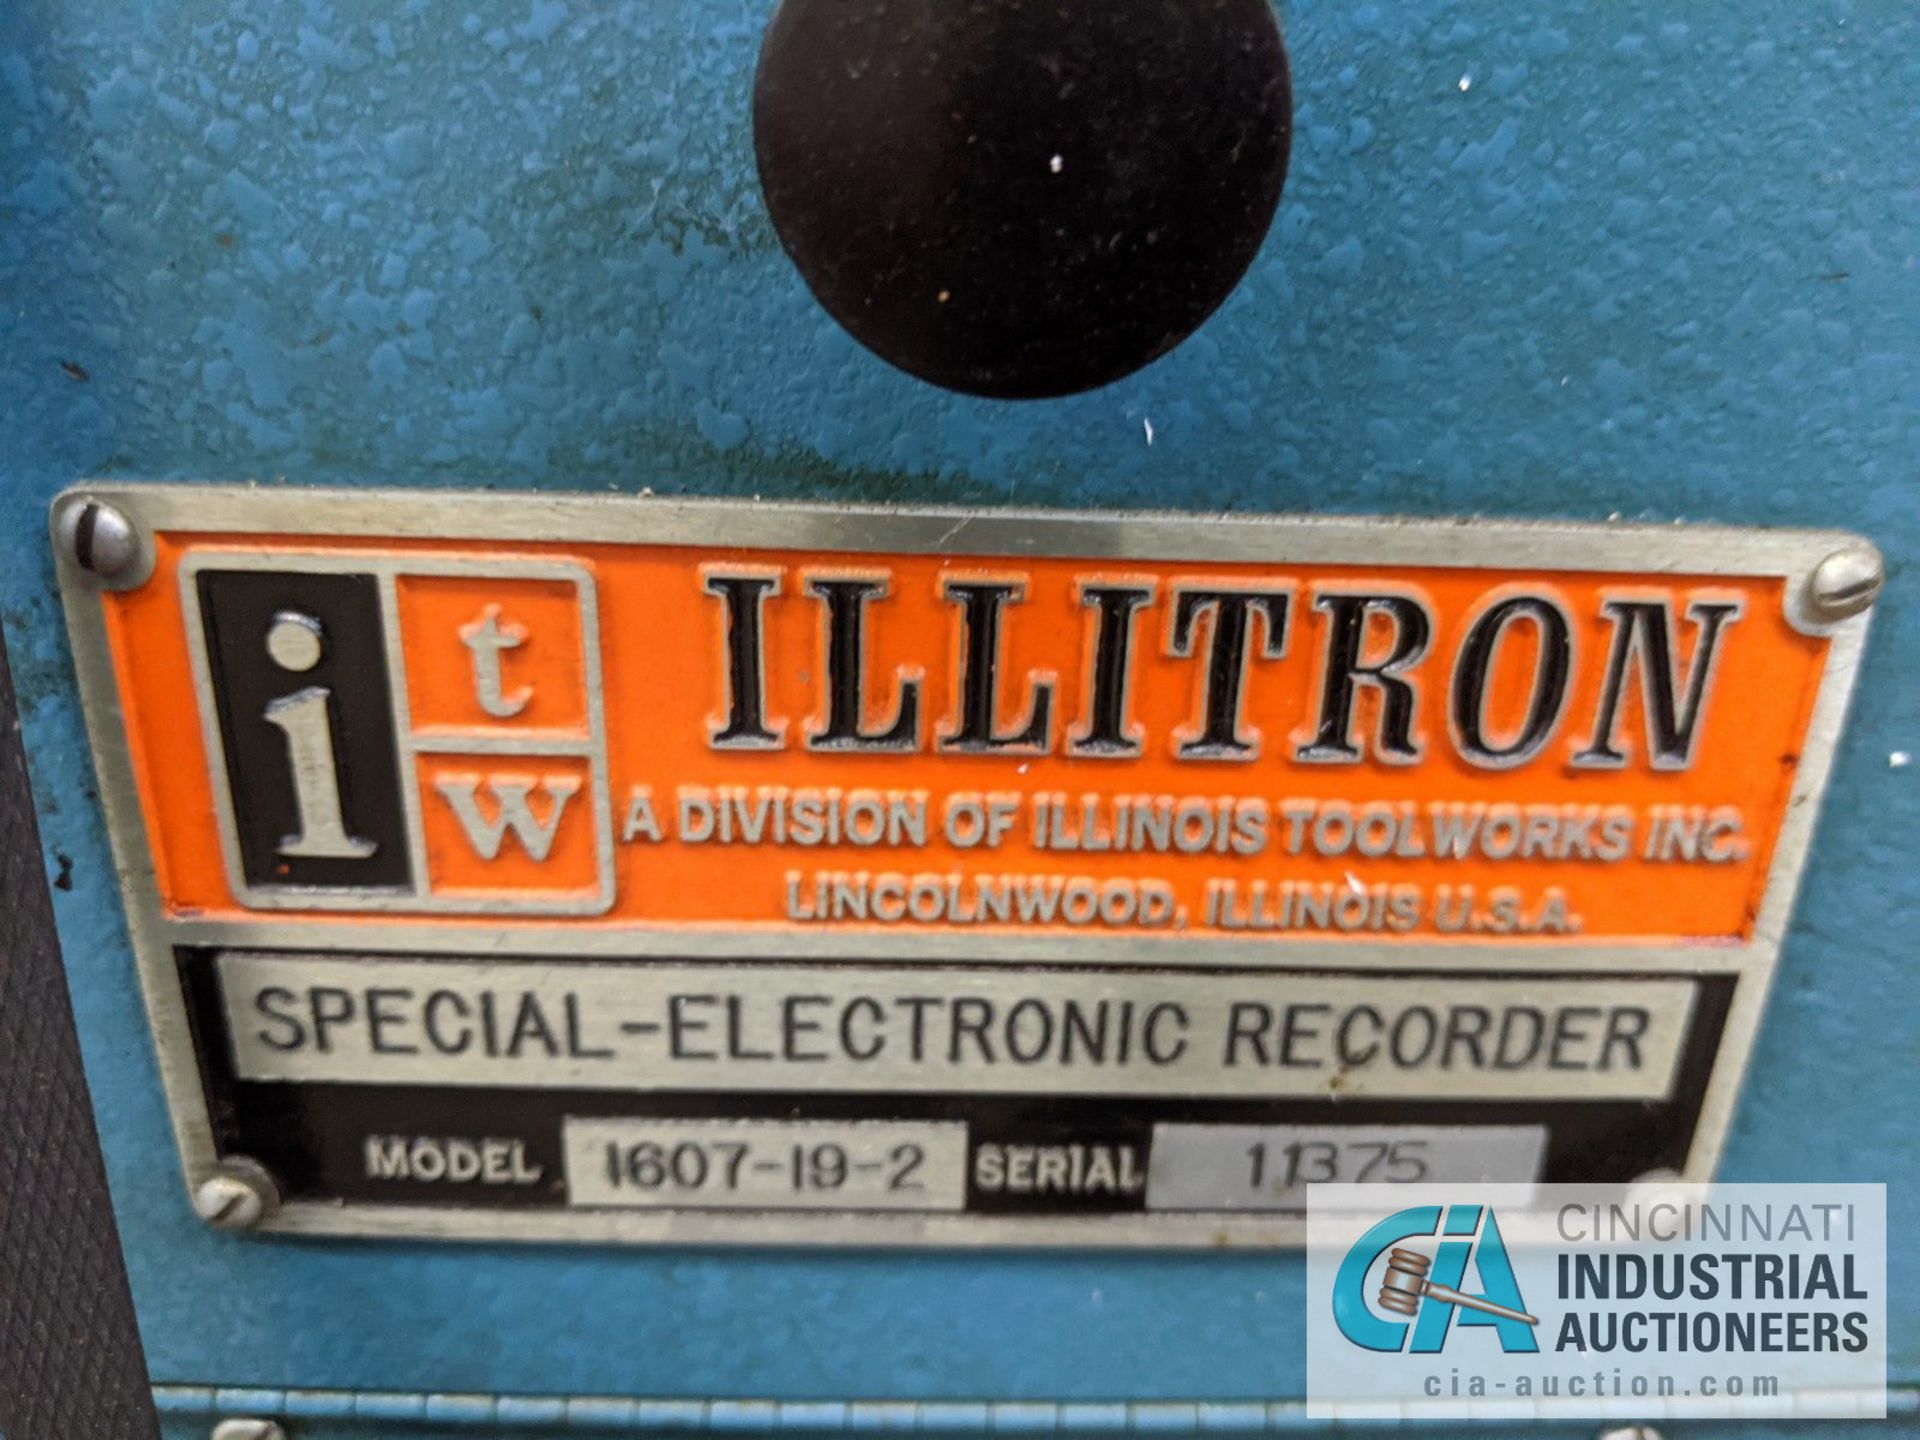 ILLITRON MODEL 1607-19-2 SPECIAL ELECTRIC RECORDER; S/N 11375 WITH SELENOIDS - Image 4 of 6